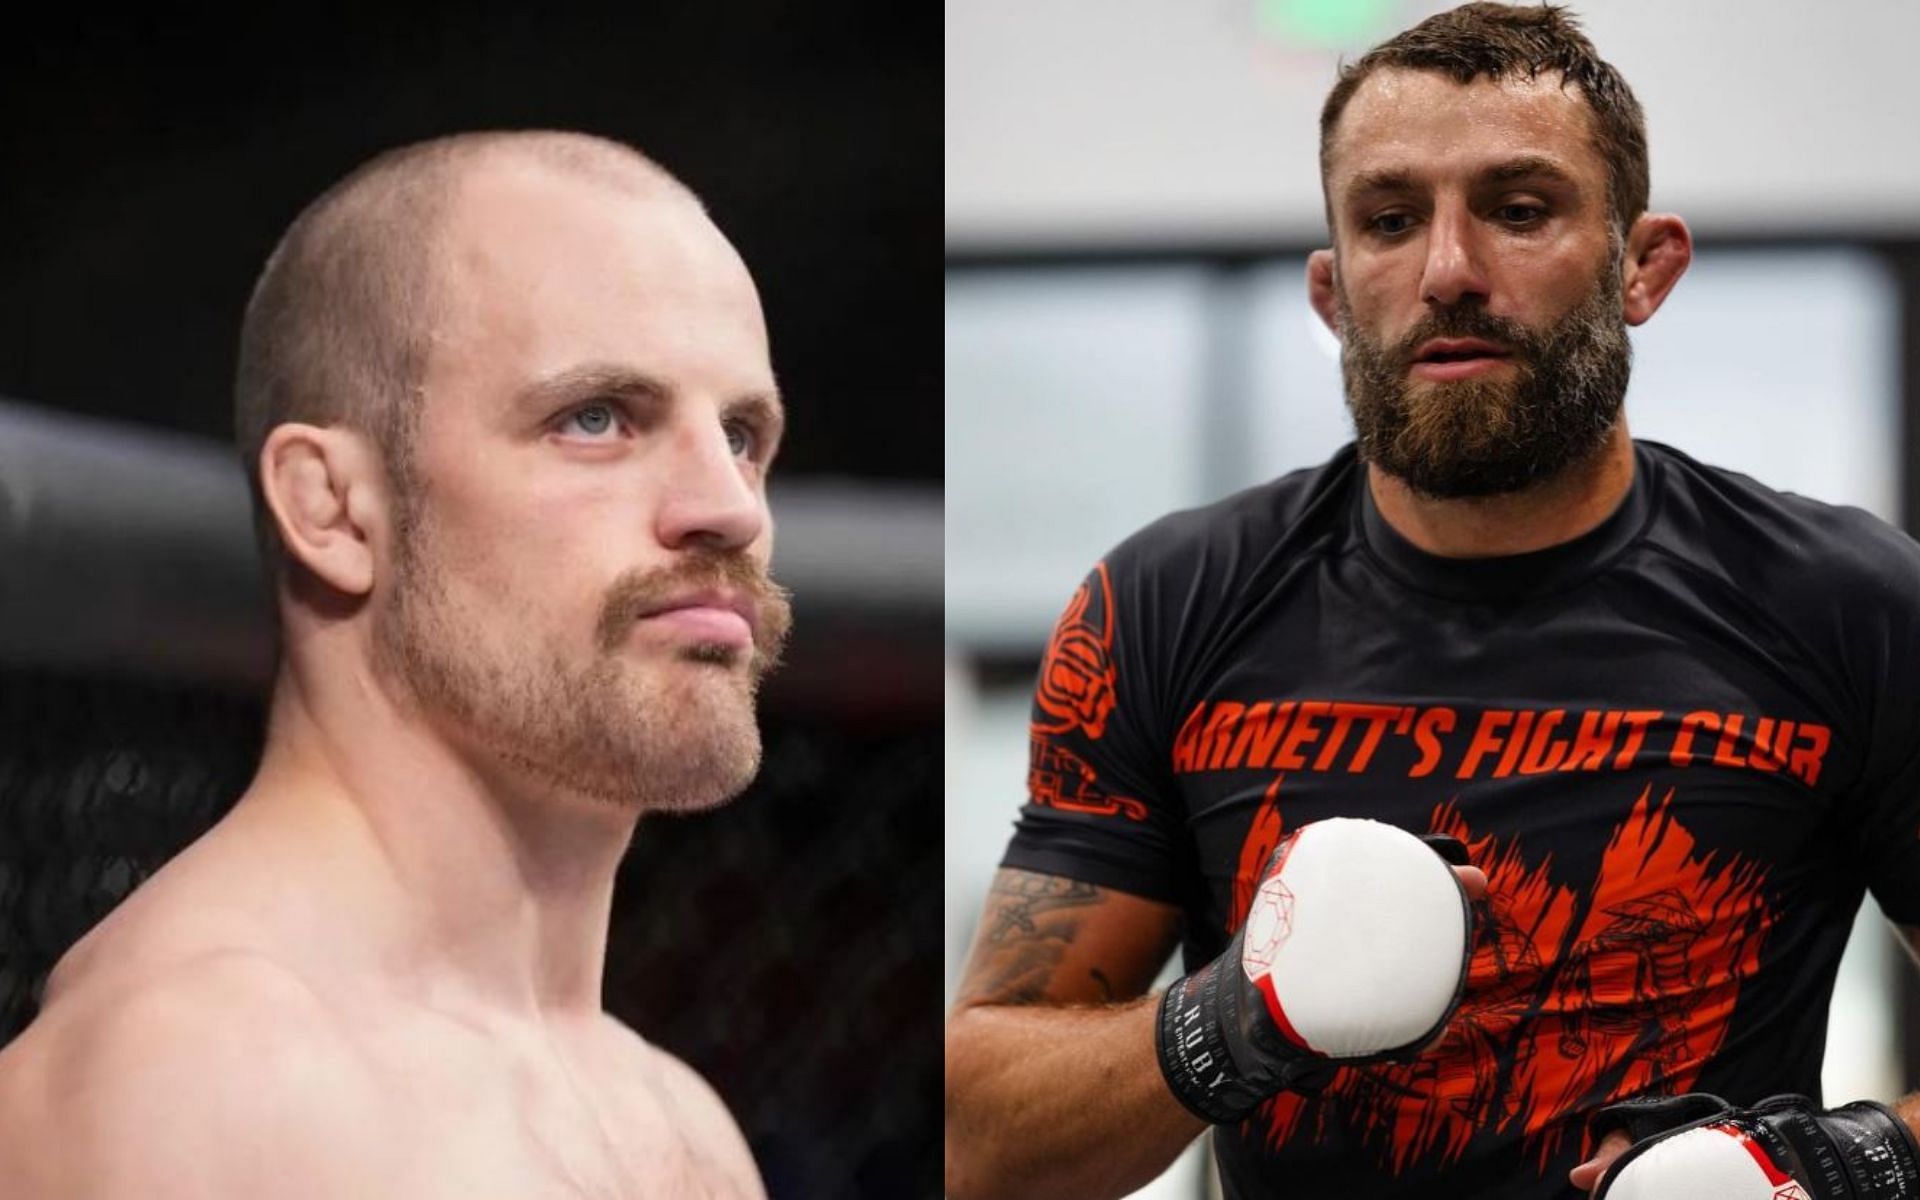 Fans speculate Gunnar Nelson (left) will face Michael Chiesa (right) in August. [Image credit: @gunnarnelson and @mikemav22 on Instagram]